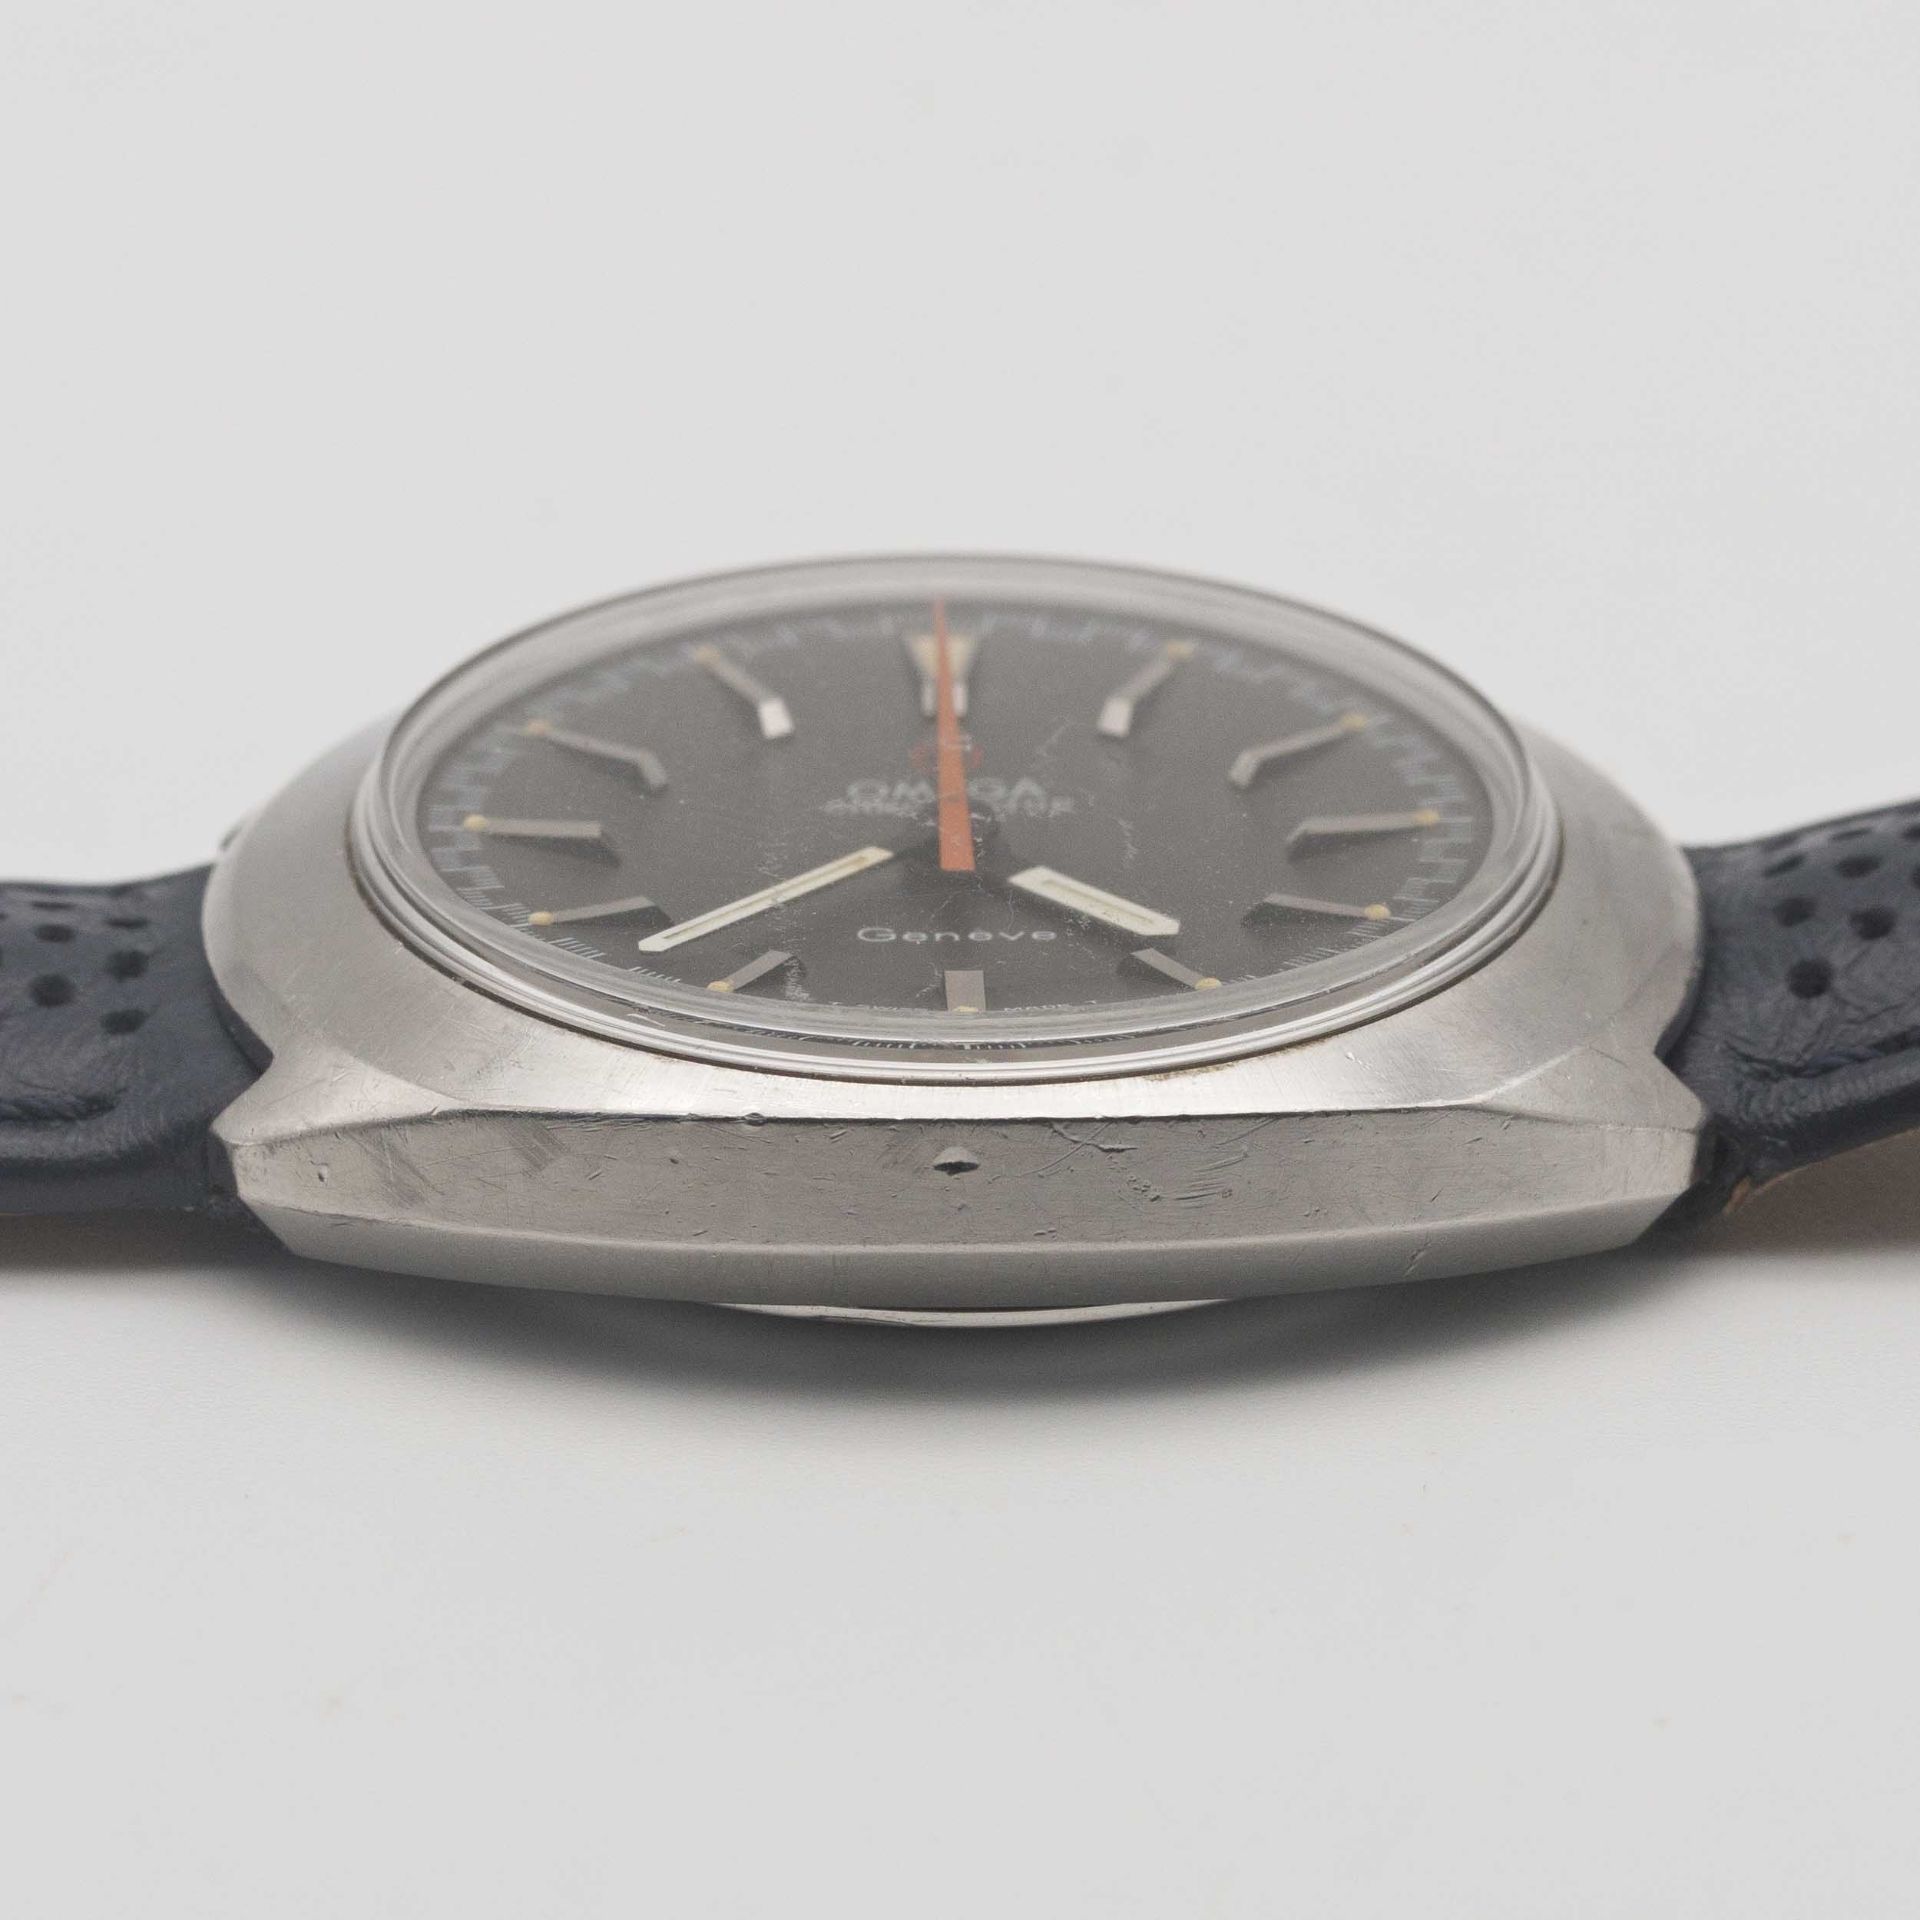 A GENTLEMAN'S STAINLESS STEEL OMEGA CHRONOSTOP DRIVERS WRIST WATCH CIRCA 1967, REF. 145.010 WITH - Image 9 of 9